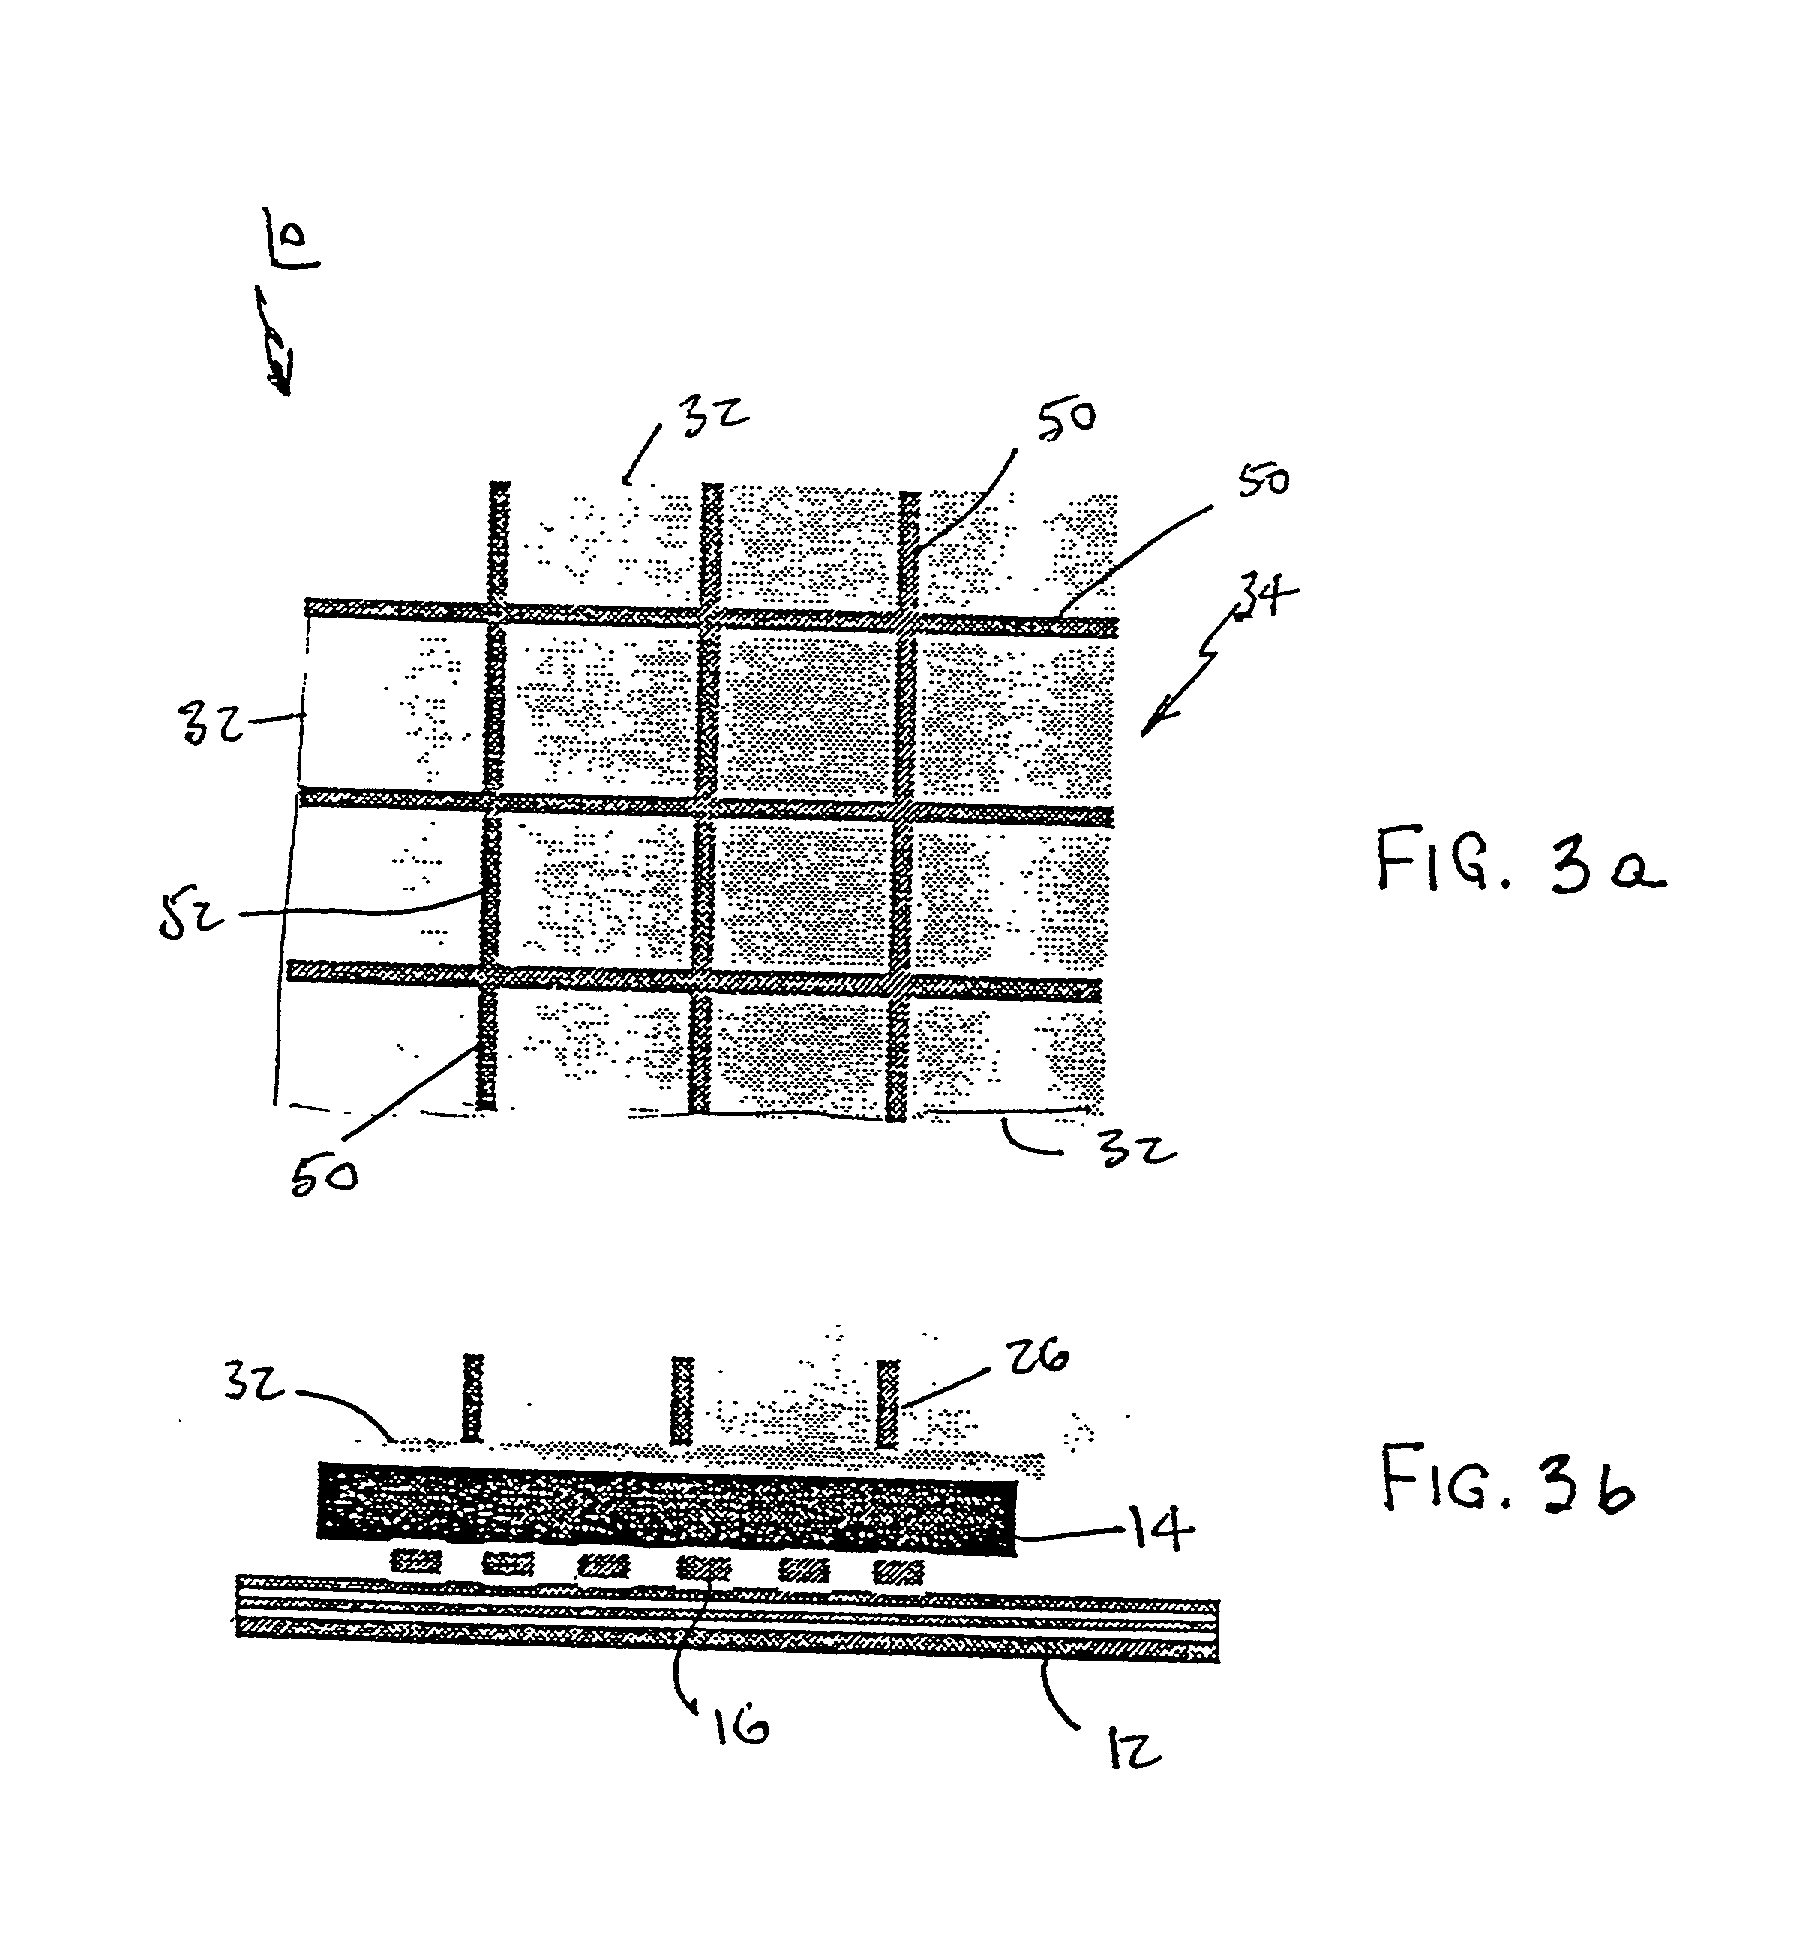 Stress-relieving heatsink structure and method of attachment to an electronic package